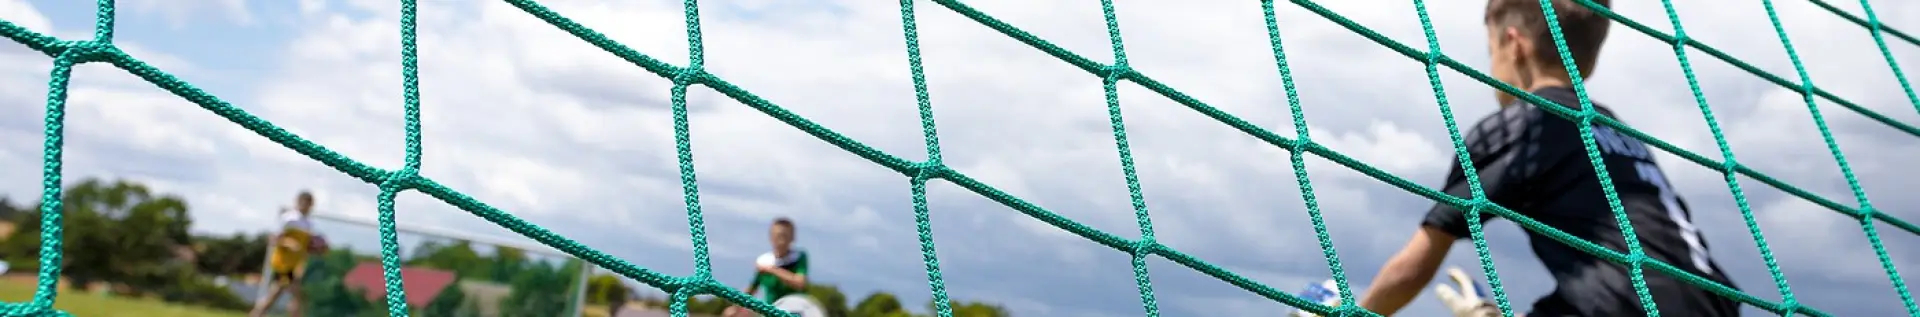 Fence Nets for tennis courts